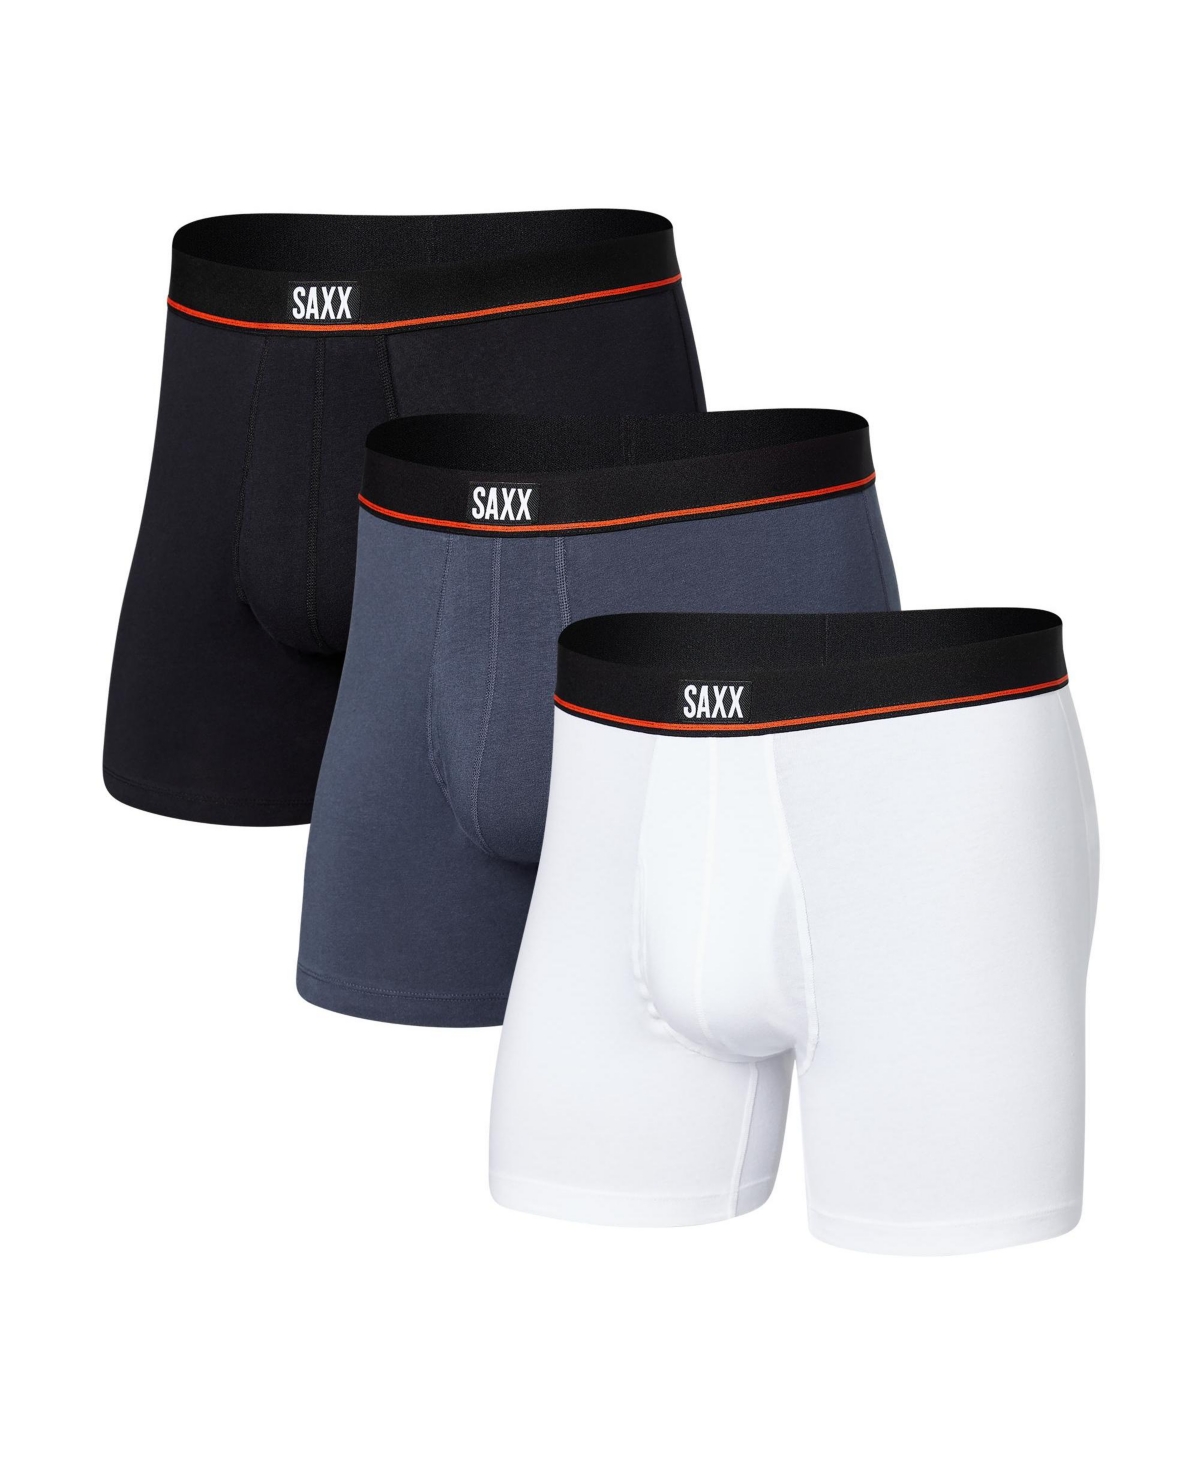 Men's Non-Stop Stretch Boxer Fly Brief, Pack of 3 - Black, Deep Navy, White